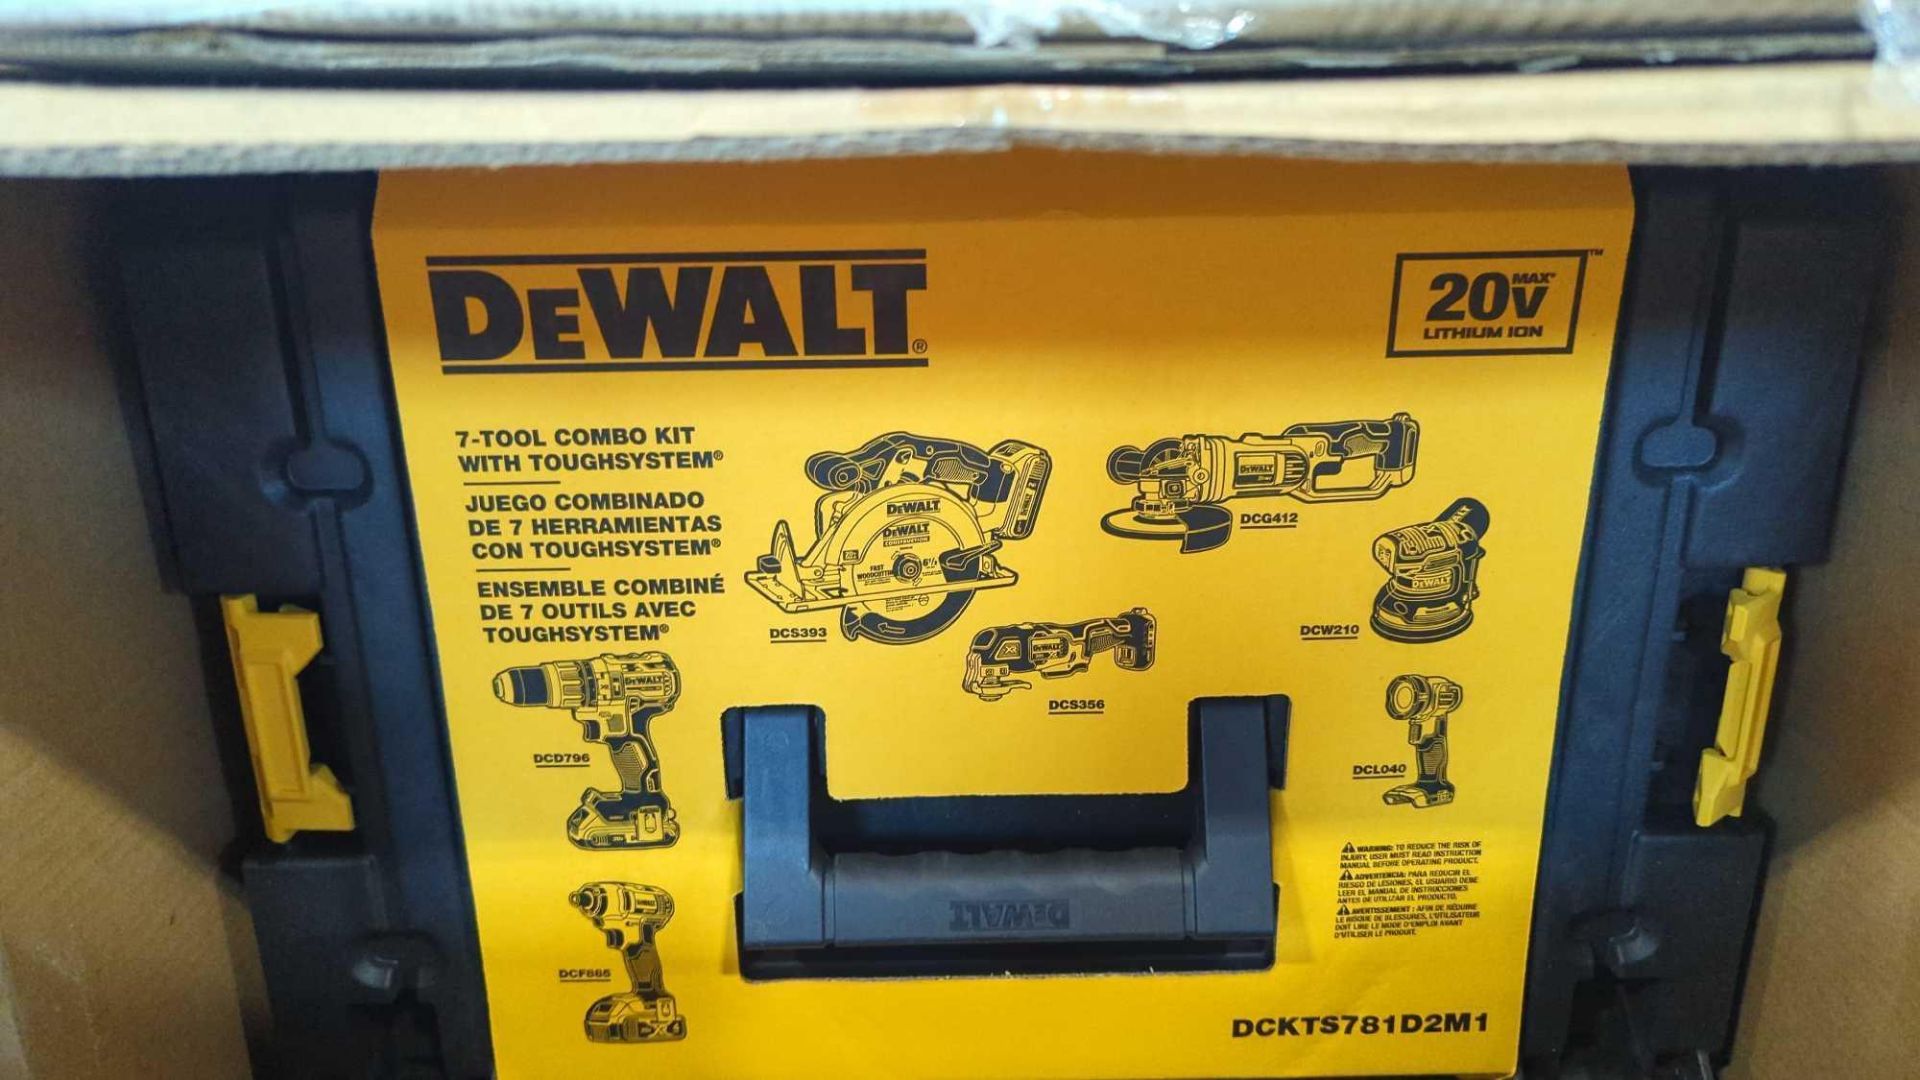 Dewalt 7 tool combo kit, bench vice, and more